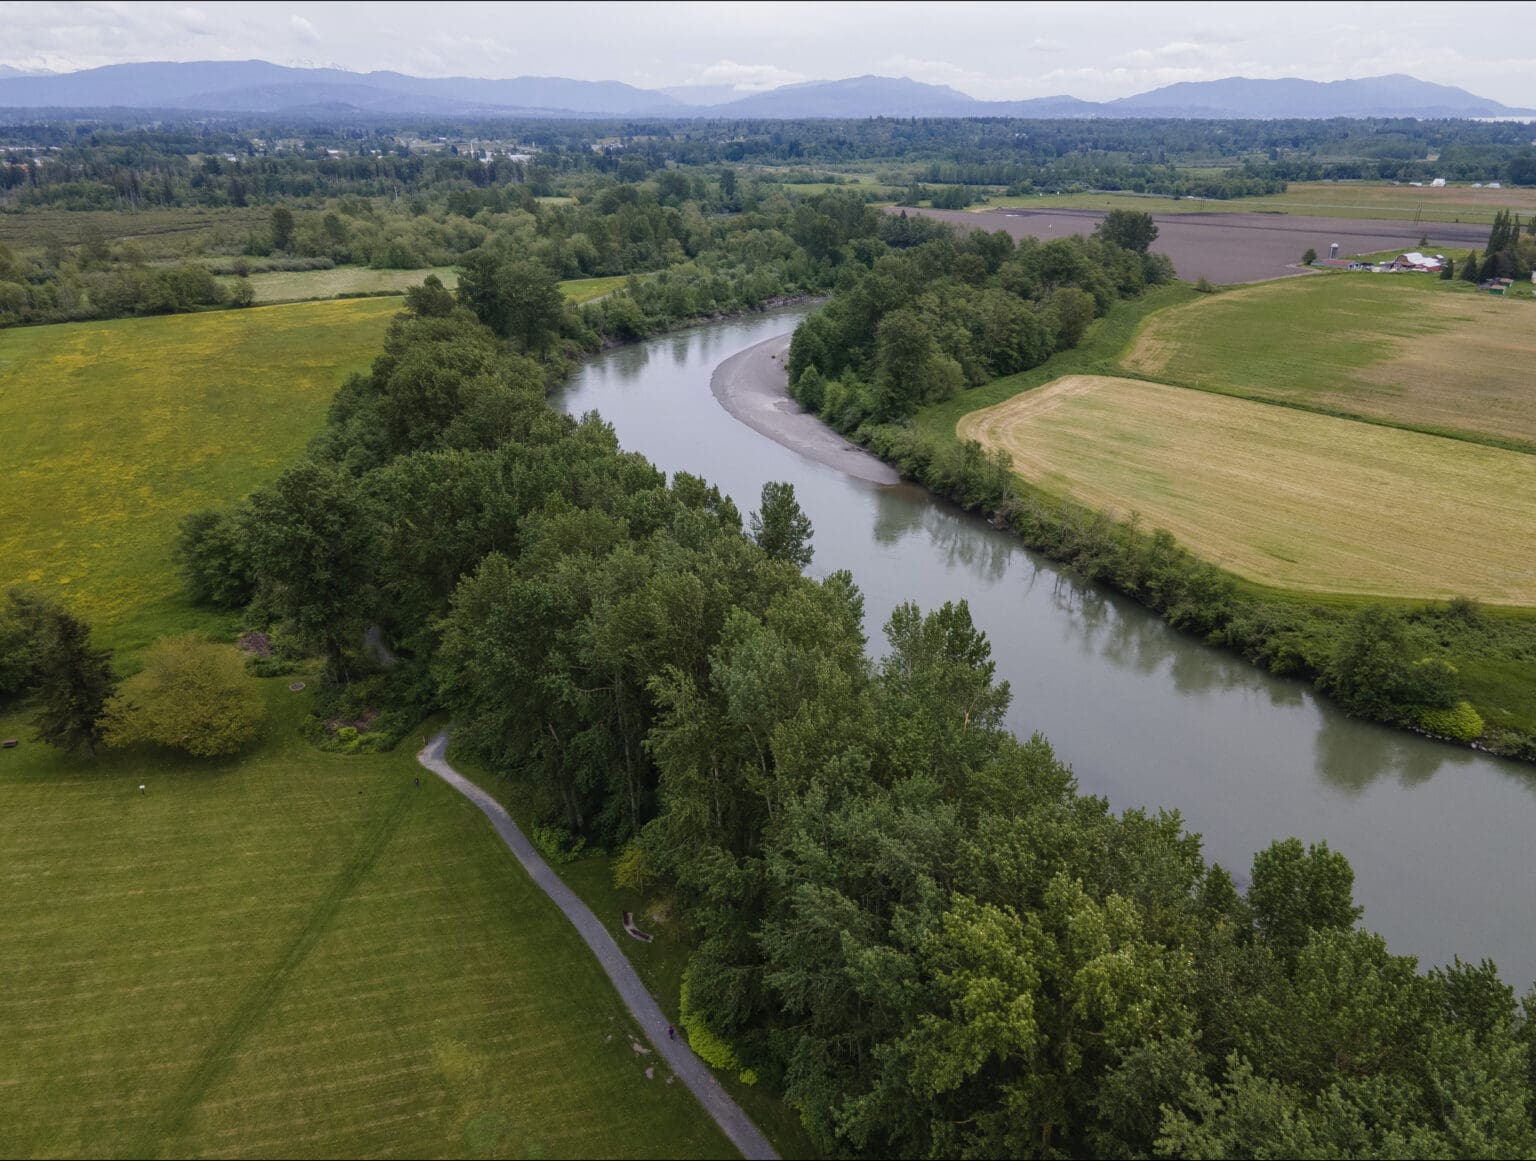 Adjudication in the Nooksack River watershed has been delayed until spring 2024 while state agencies prepare for the potentially decades-long legal process.